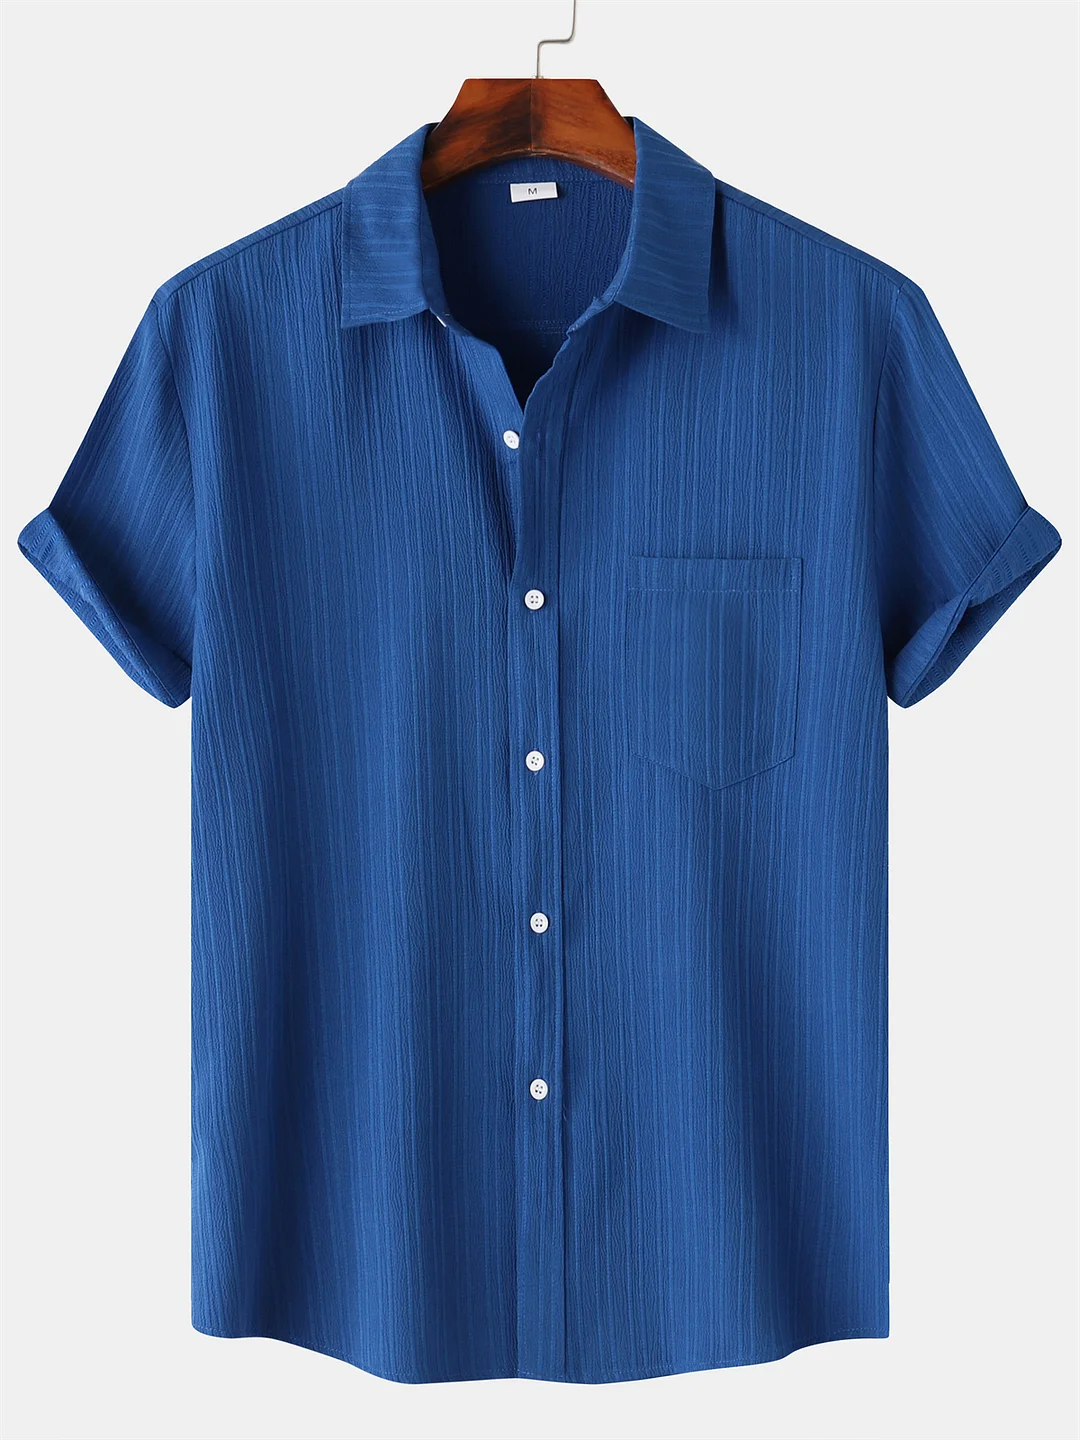 Suitmens Men's Striped Texture Cotton And Linen Simple Casual Pocket Short-sleeved Shirt